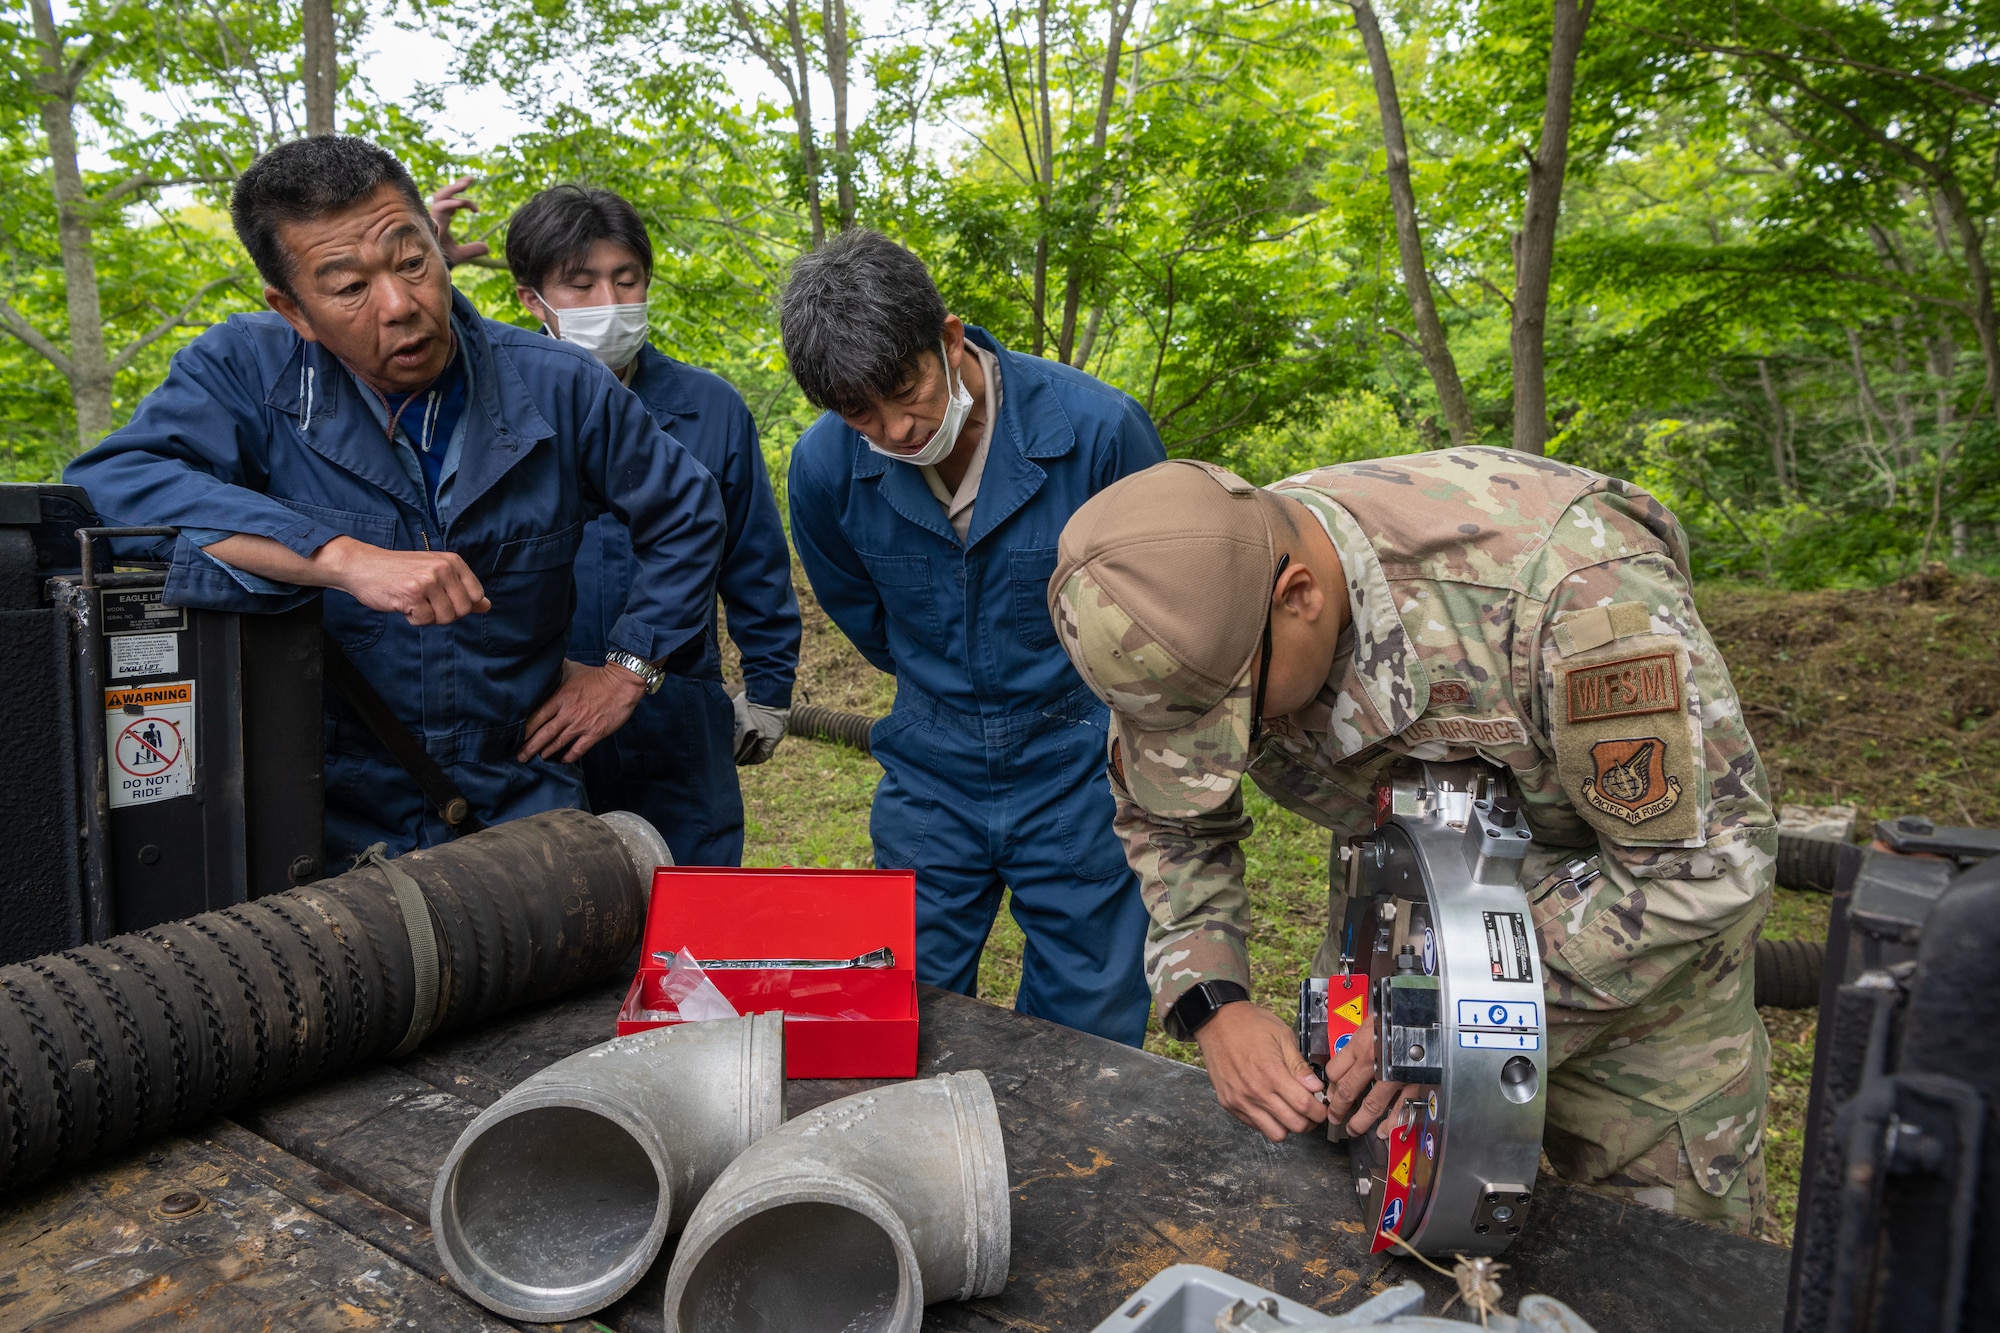 U.S. Air Force Senior Airman Joshua Sanchez, 35th Civil Engineer Squadron water and fuel system journeyman, puts together the new Water and Fuel Expedient Repair System (WaFERS) during setup for the annual Prime Base Engineer Emergency Force (Prime BEEF) at Misawa Air Base, Japan, June 13, 2022.